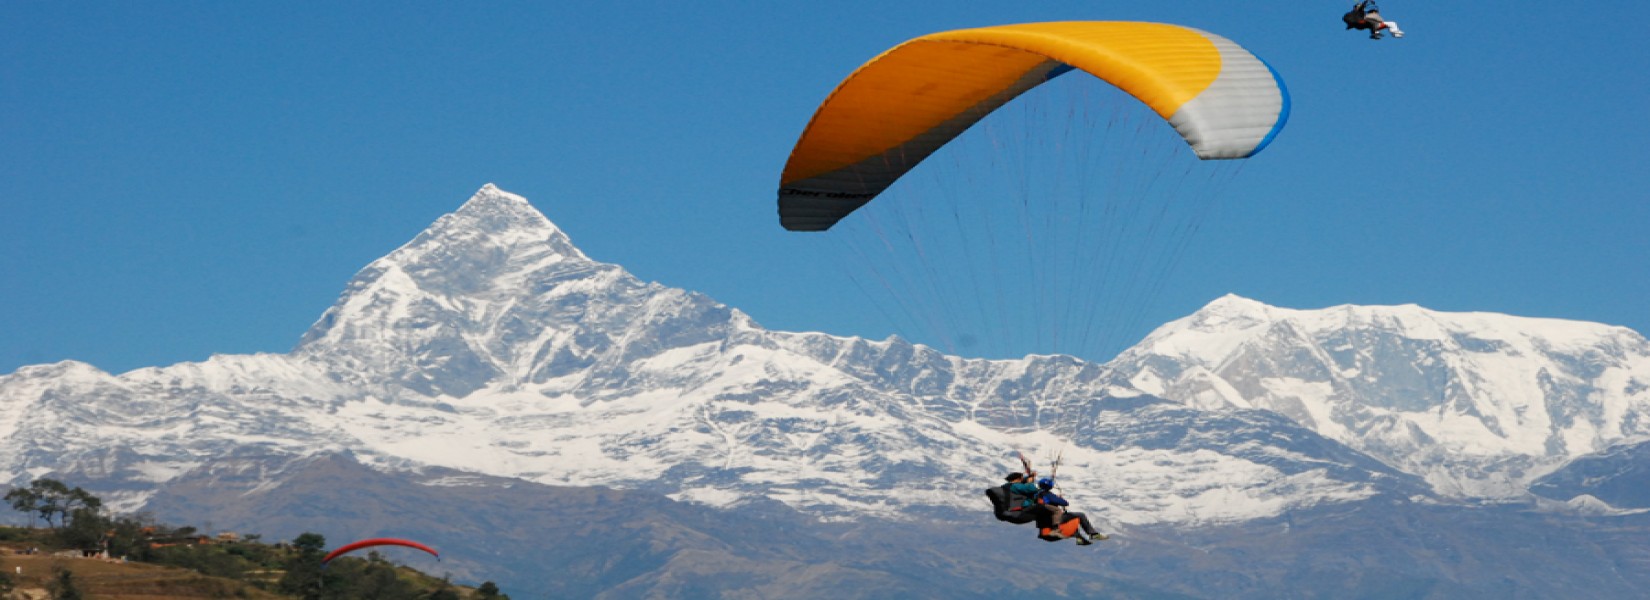 Paragliding in Pokhara.